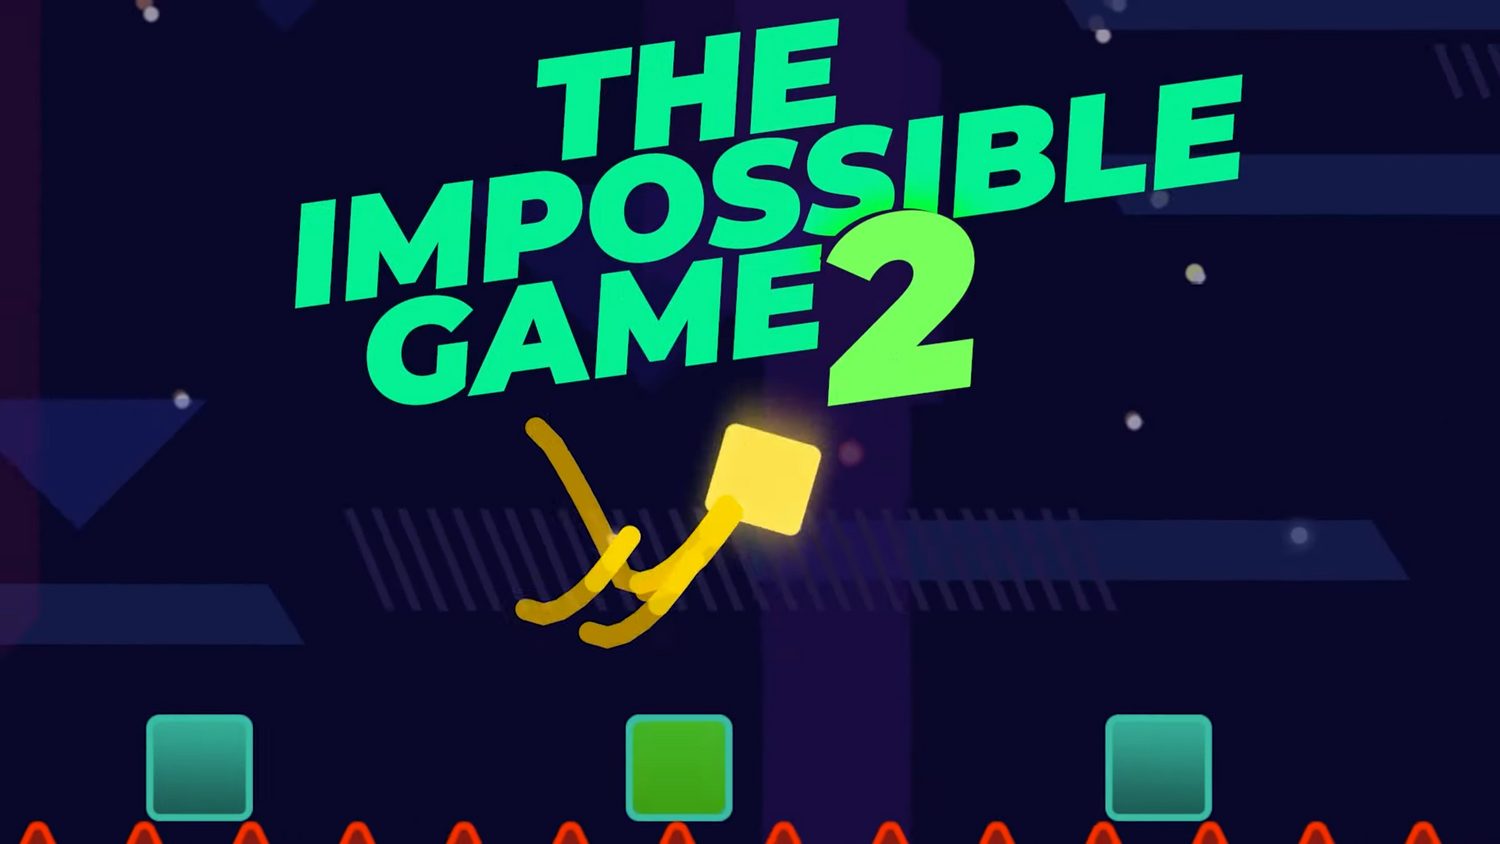 The Impossible Game 2 is an extremely frustrating game for Android & iOS